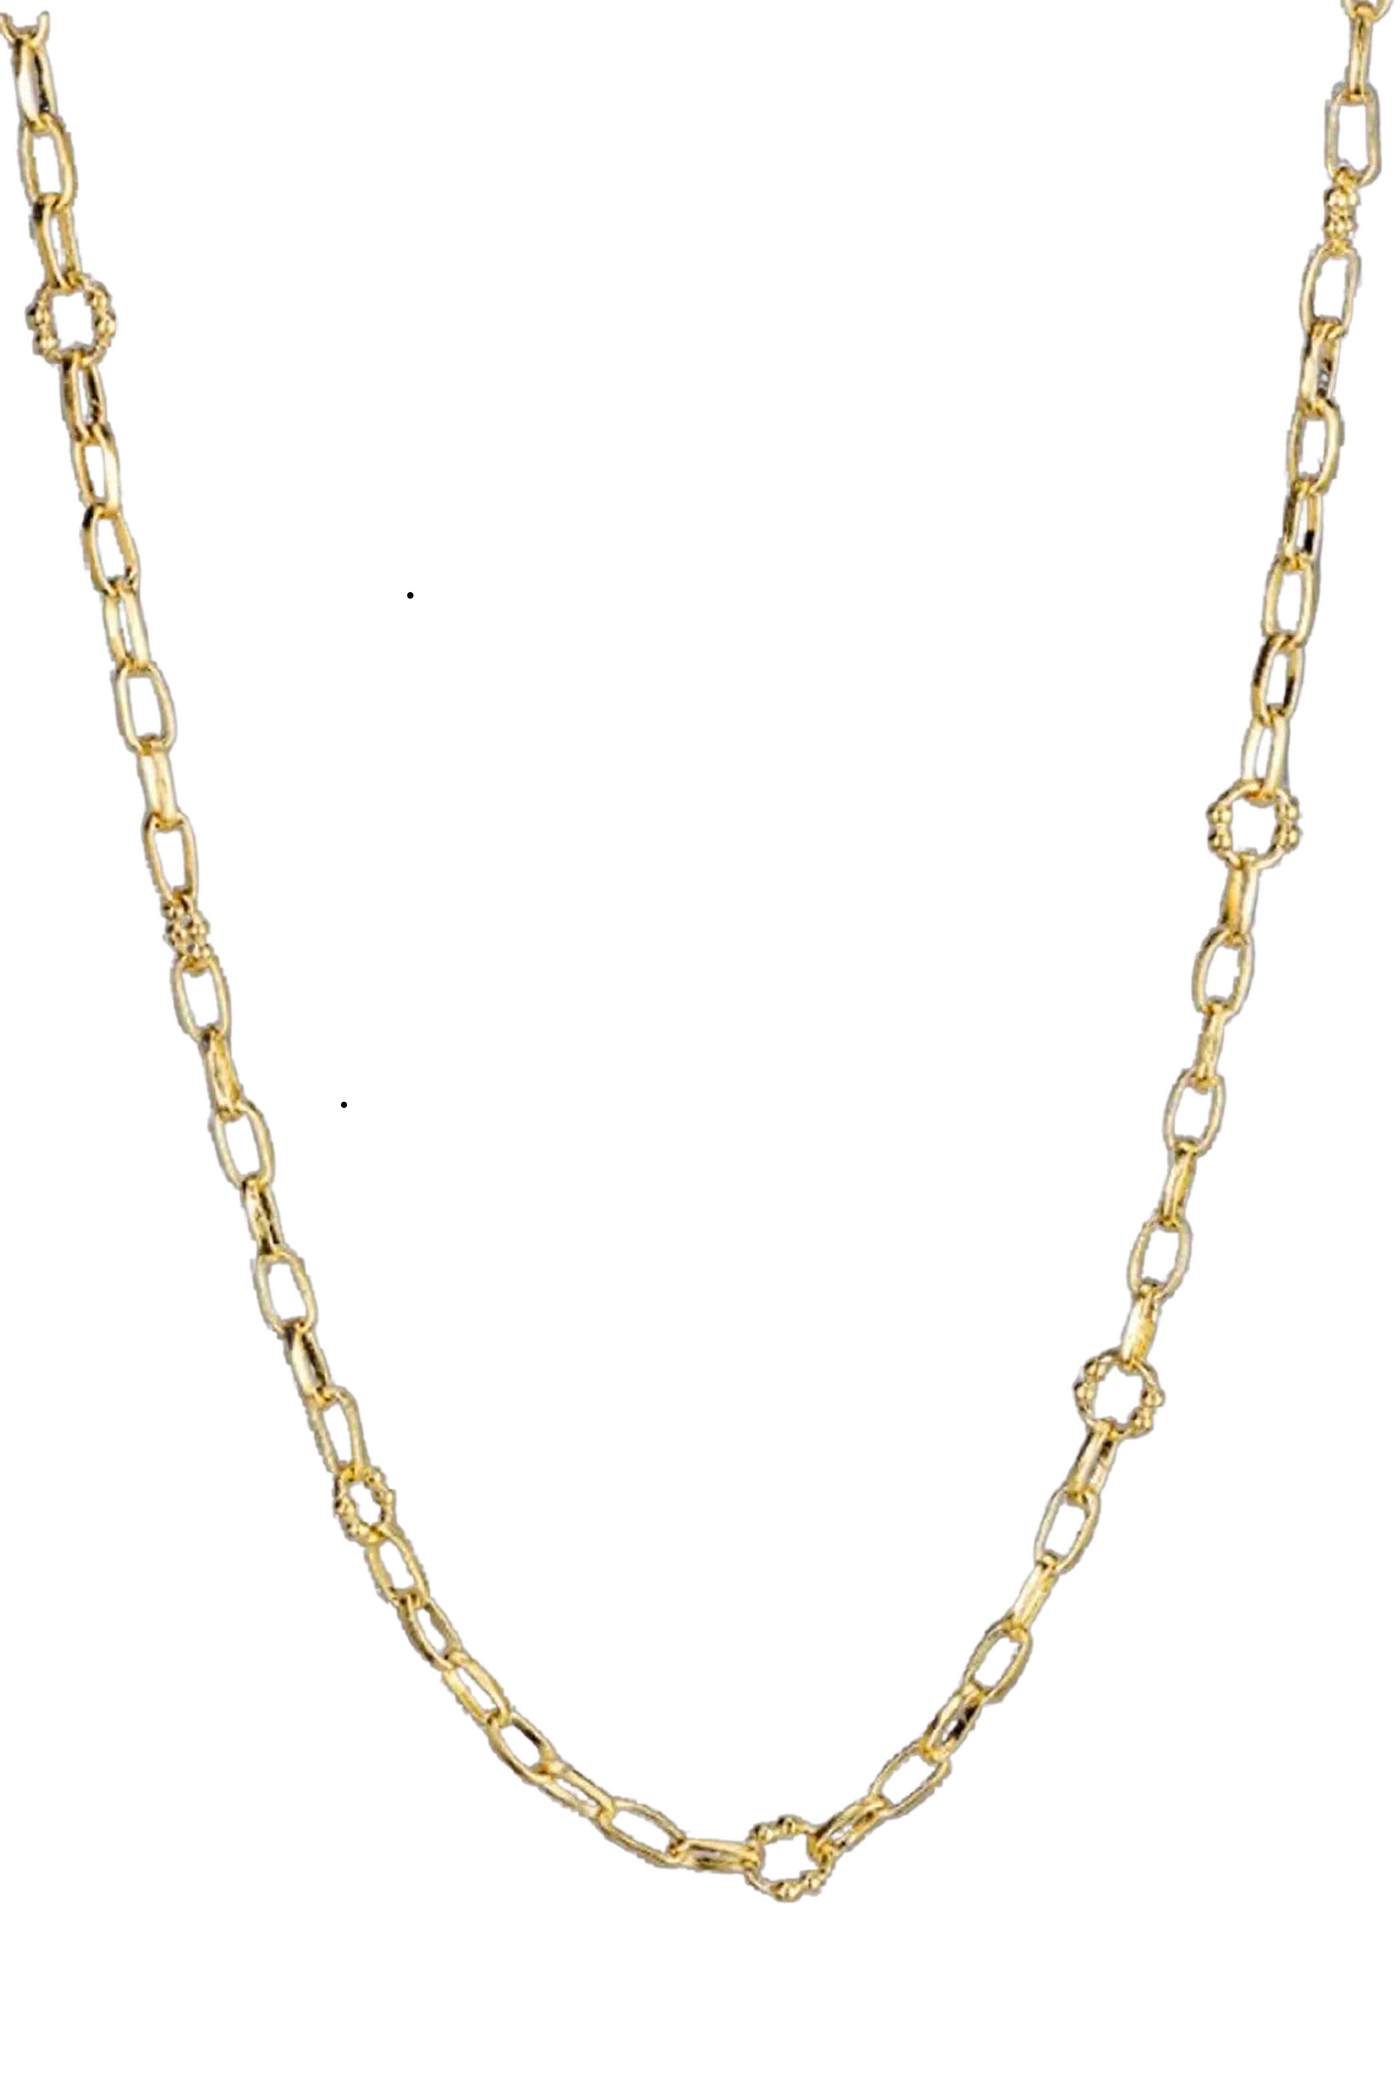 18" Gold-Plated Everything Necklace by Waxing Poetic